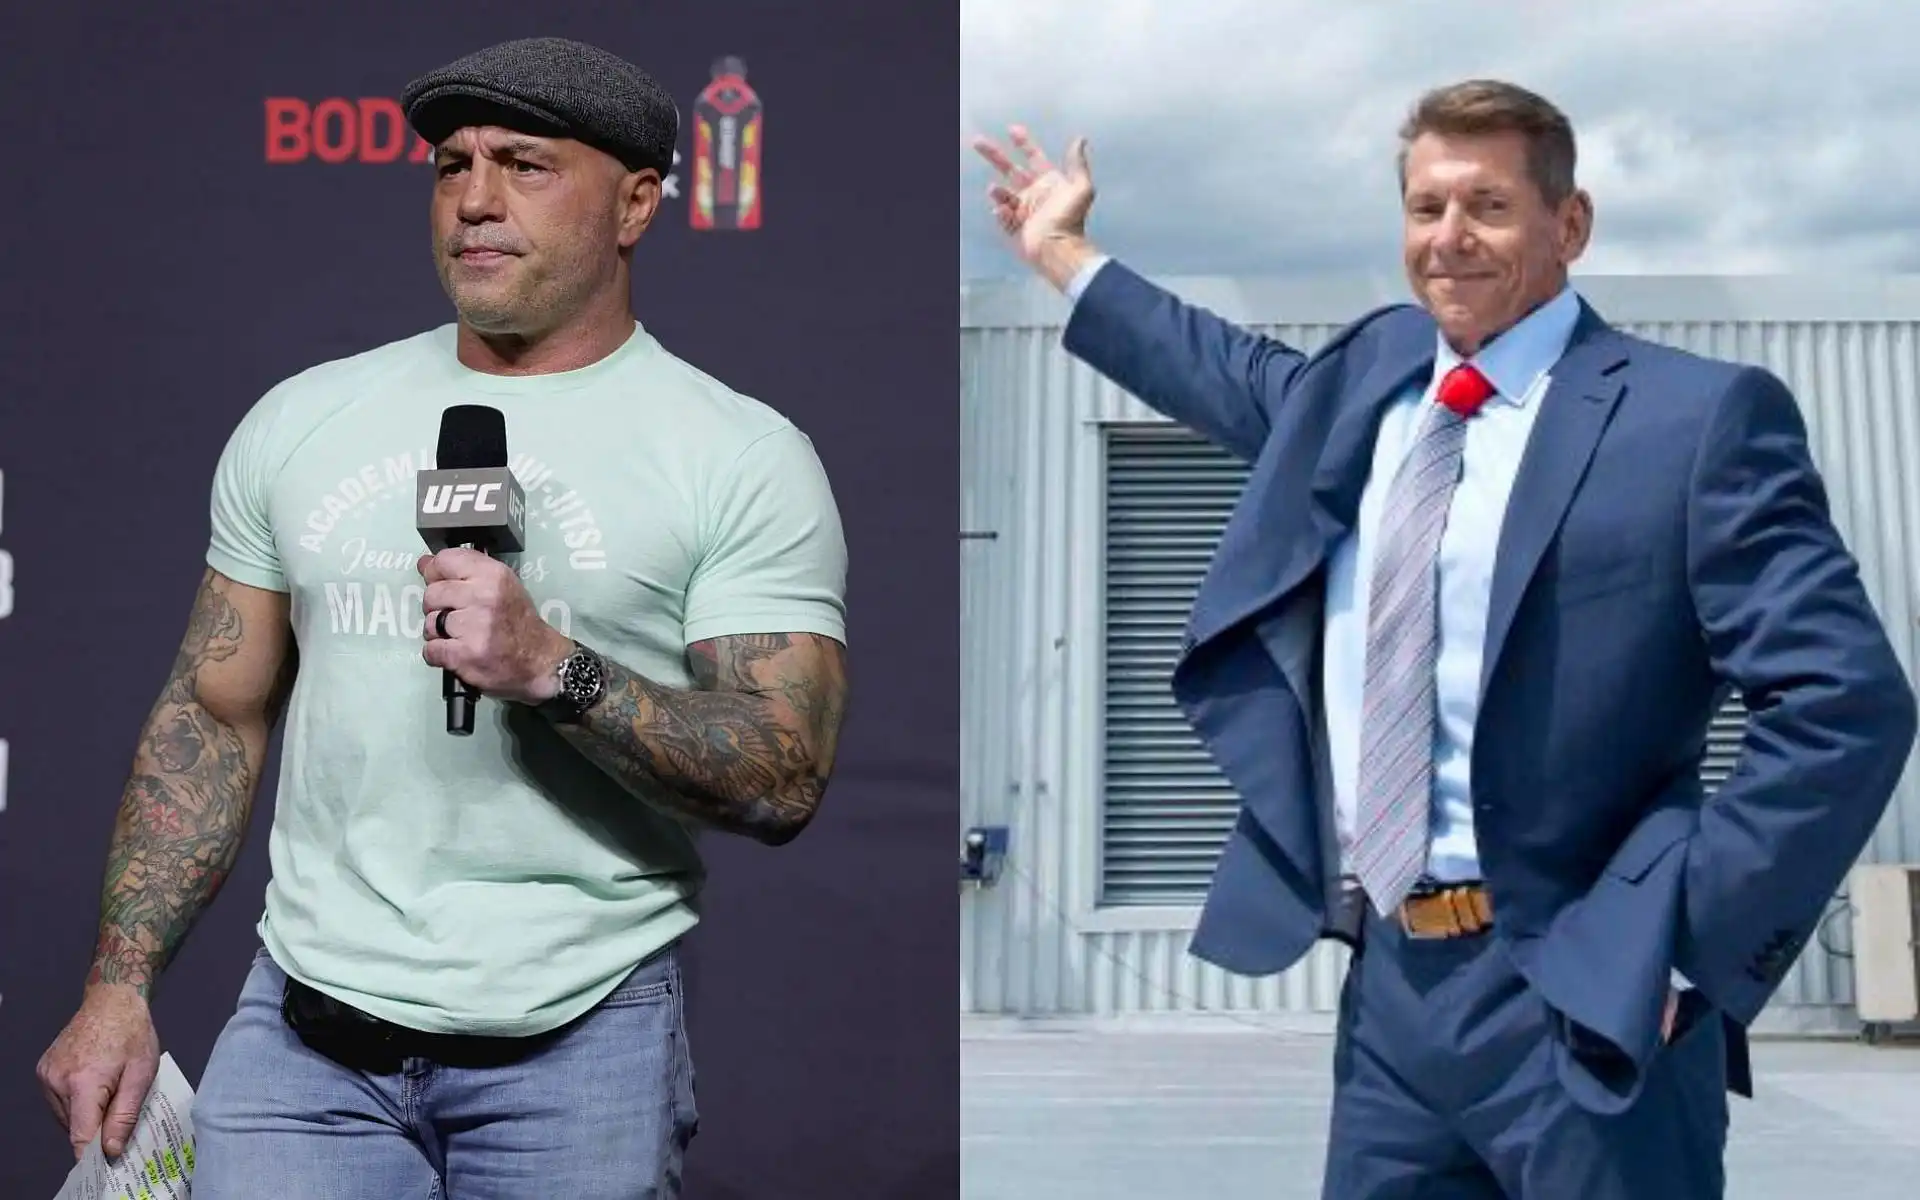 UFC commentator Joe Rogan weighs in on Vince McMahon's sex trafficking lawsuit